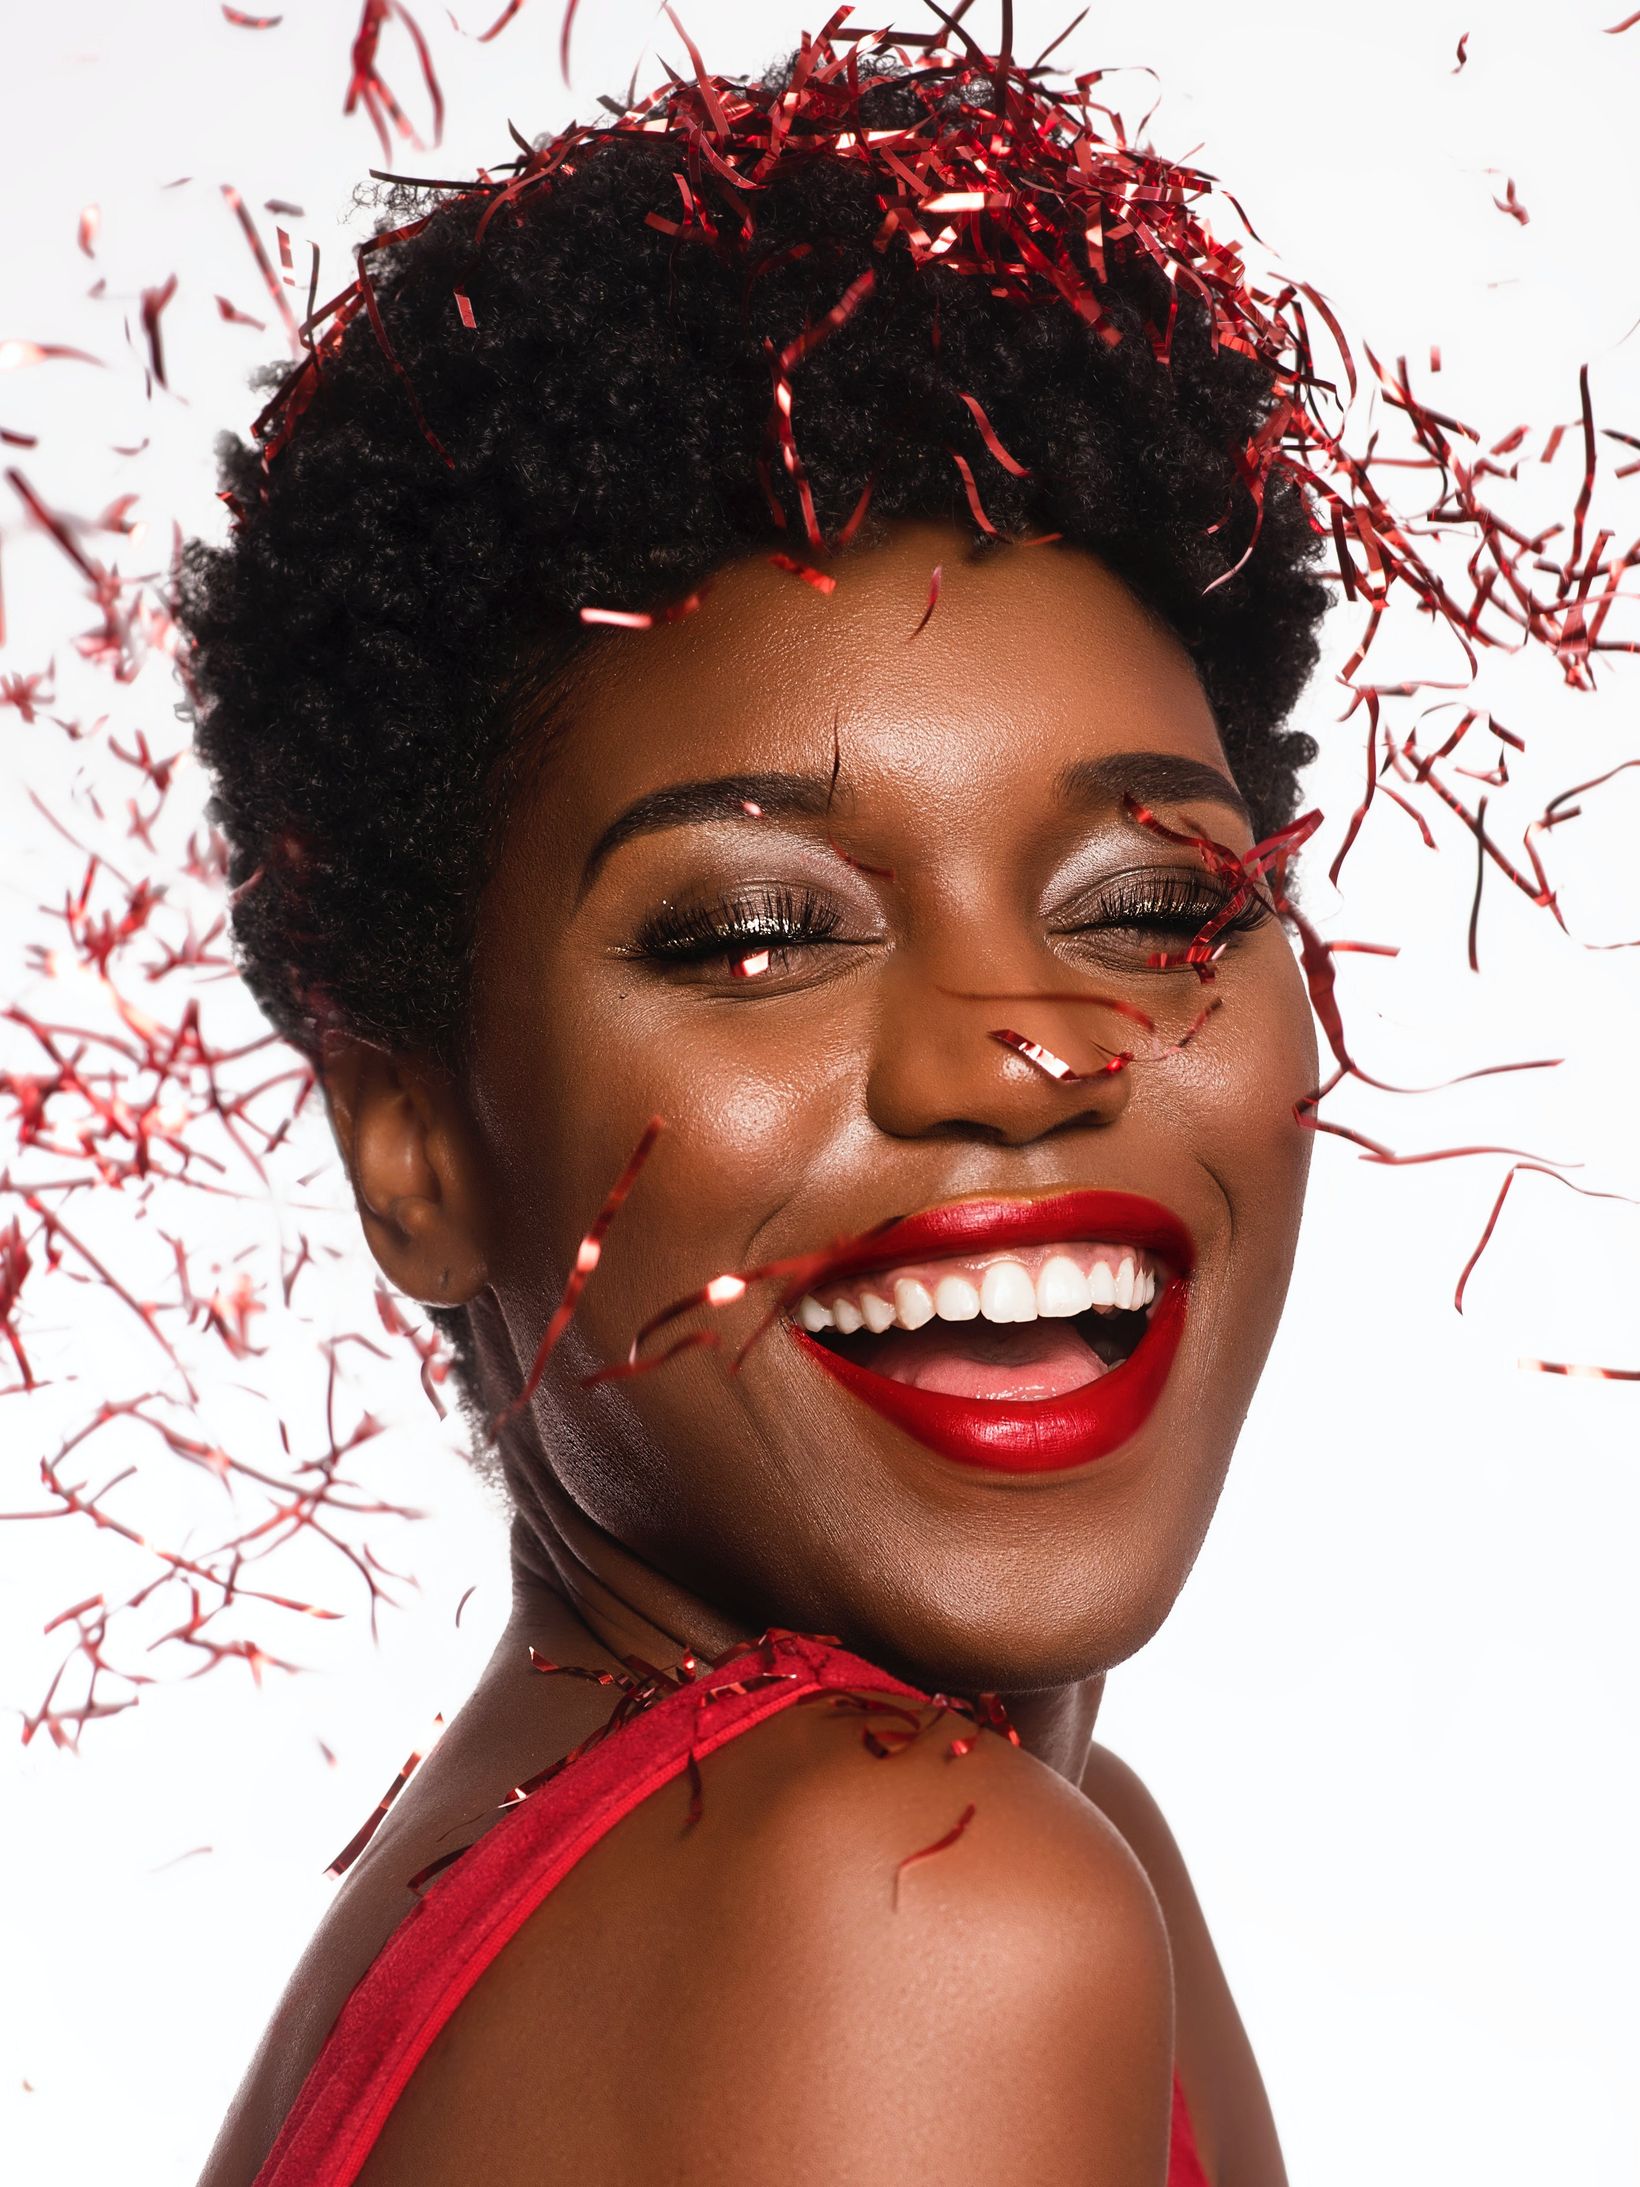 black woman wearing red lipstick, surrounded by red streamers